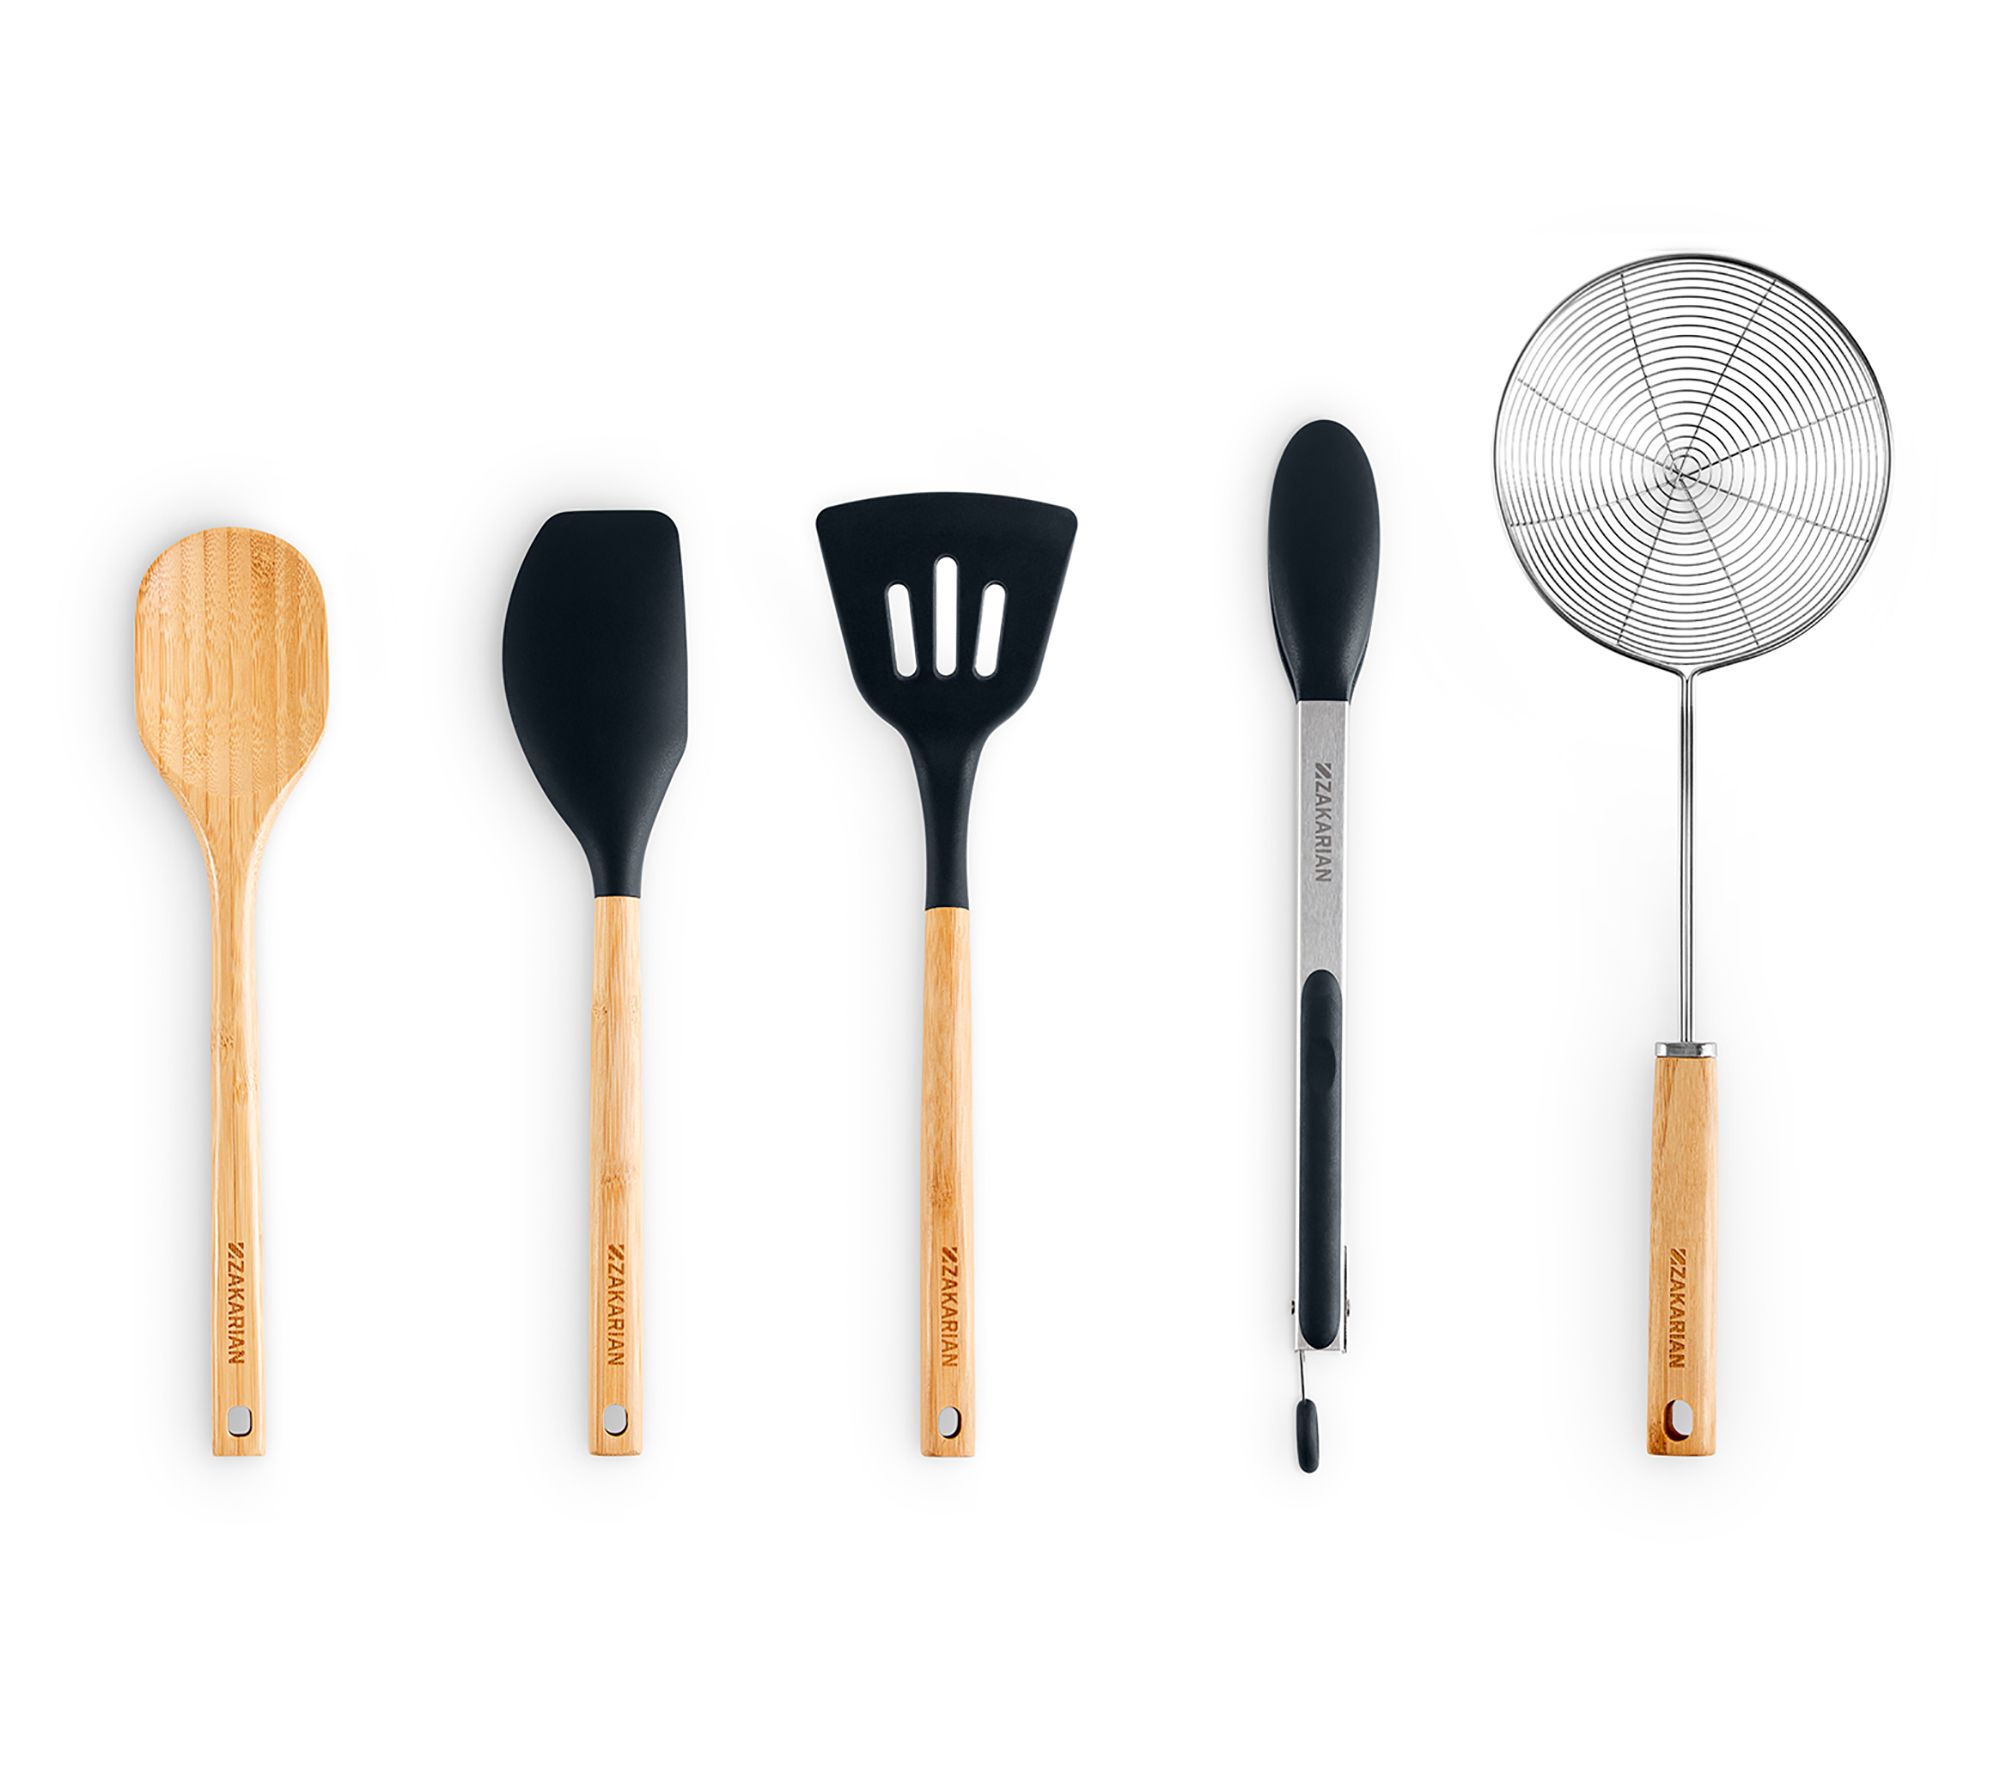 Piranha Products Kitchen Utensils  As seen on QVC and Ideal World TV  Channels!